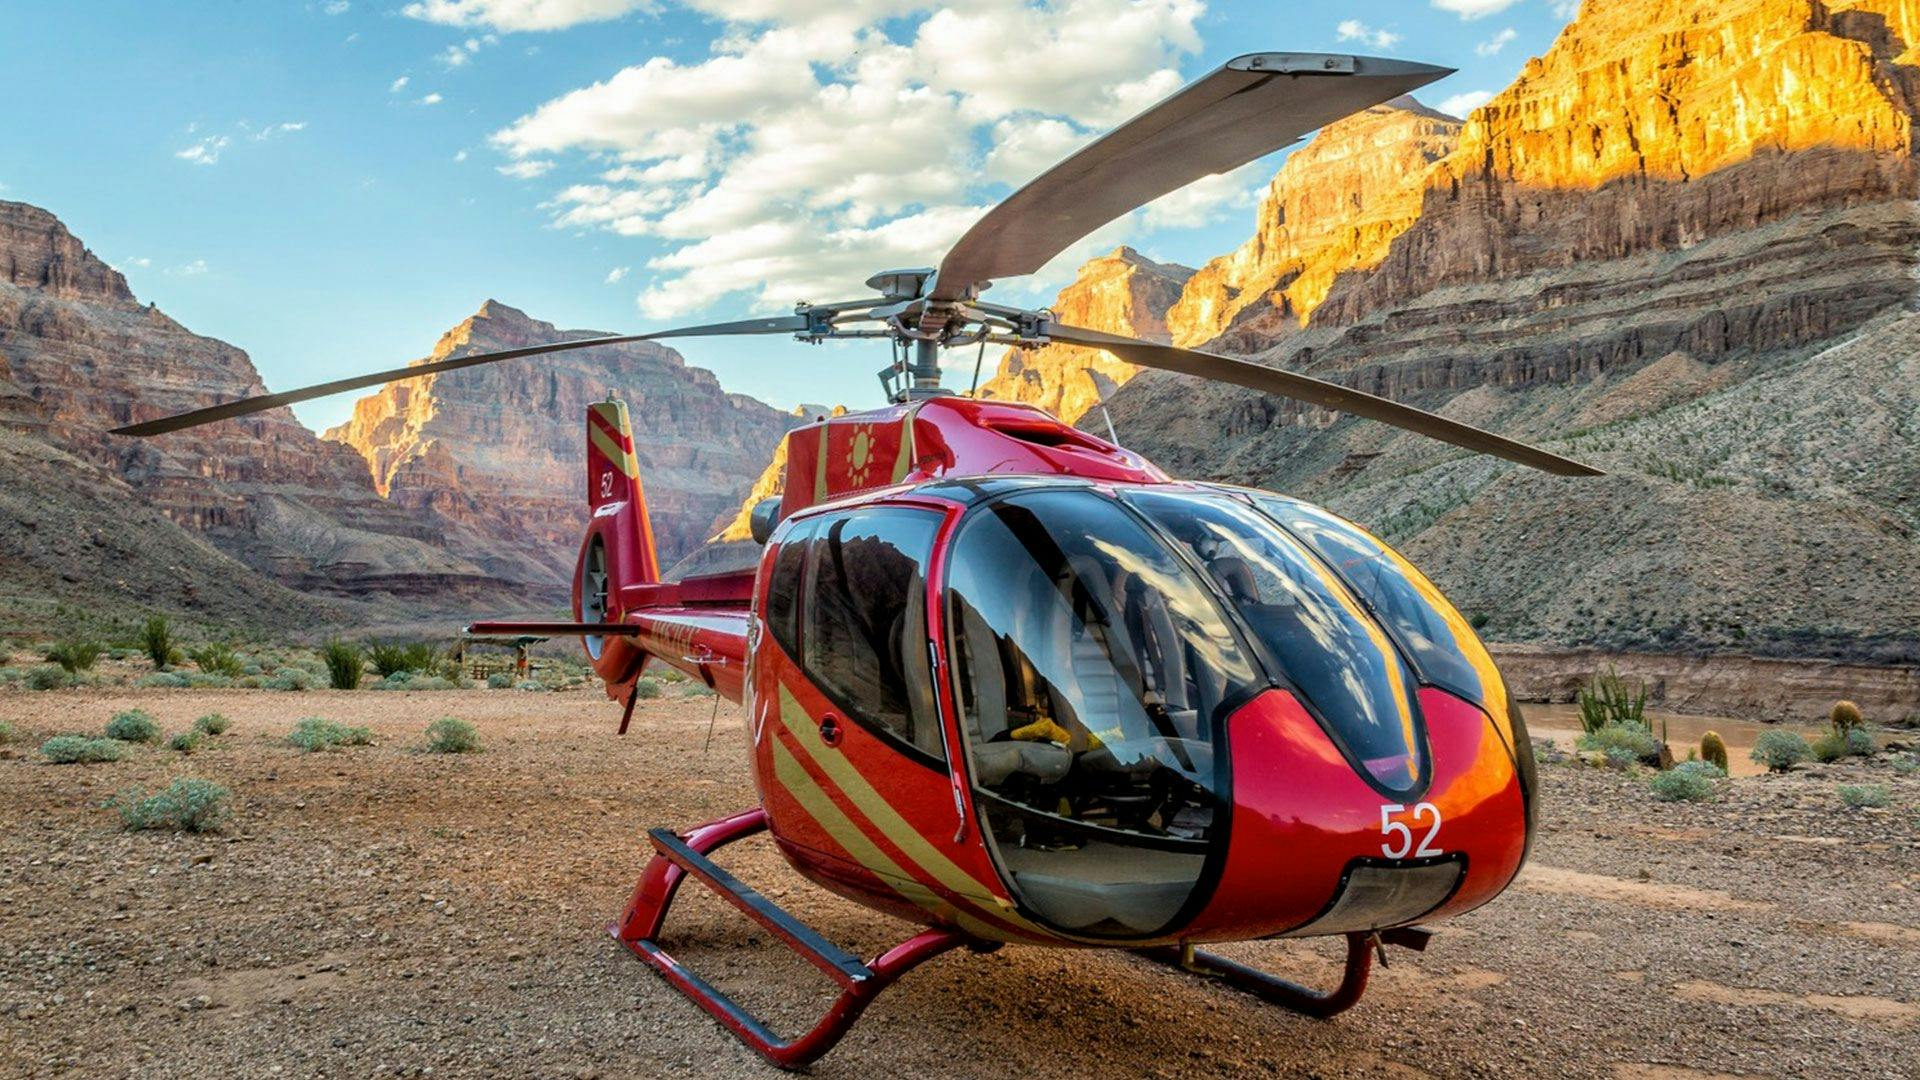 Helicopter tour to the Grand Canyon with boat ride and Skywalk tour